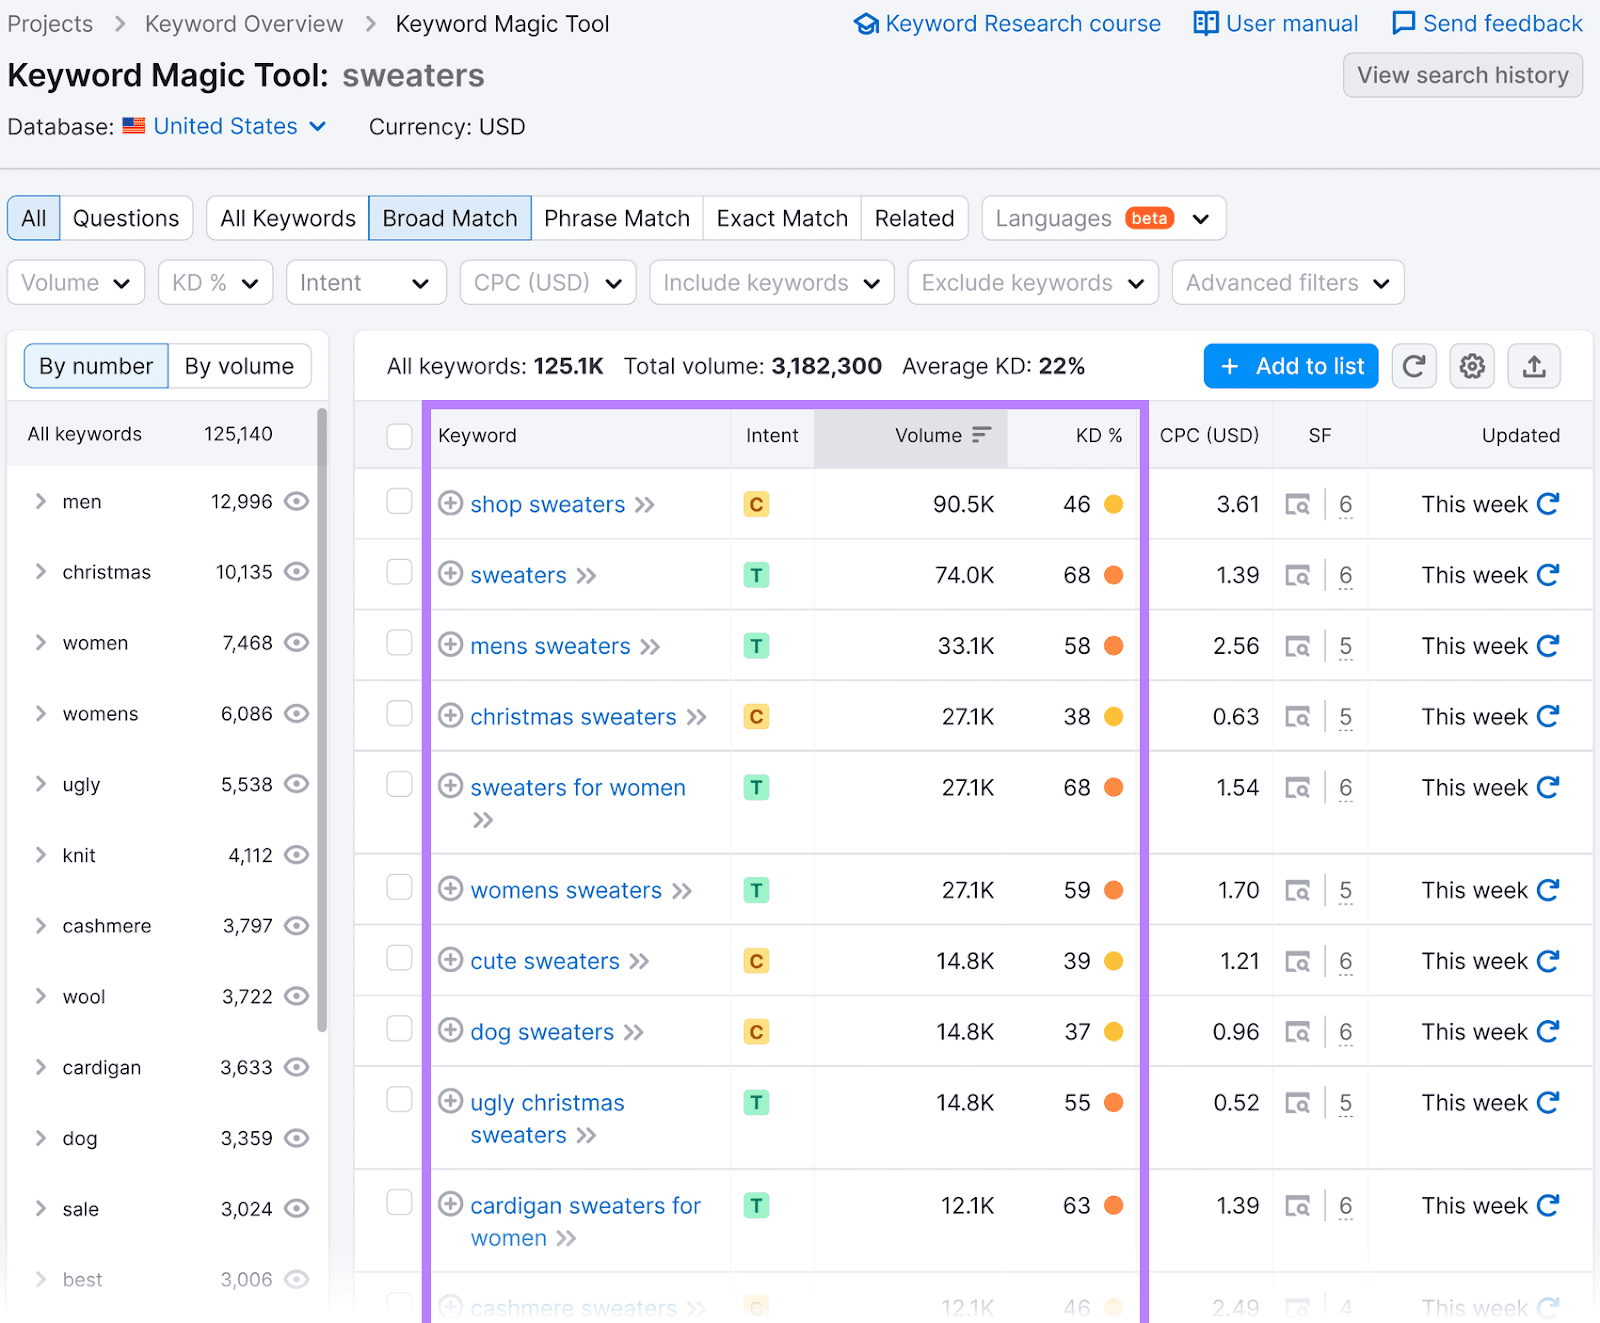 A list of related keywords to "sweaters" and their metrics in Keyword Magic Tool